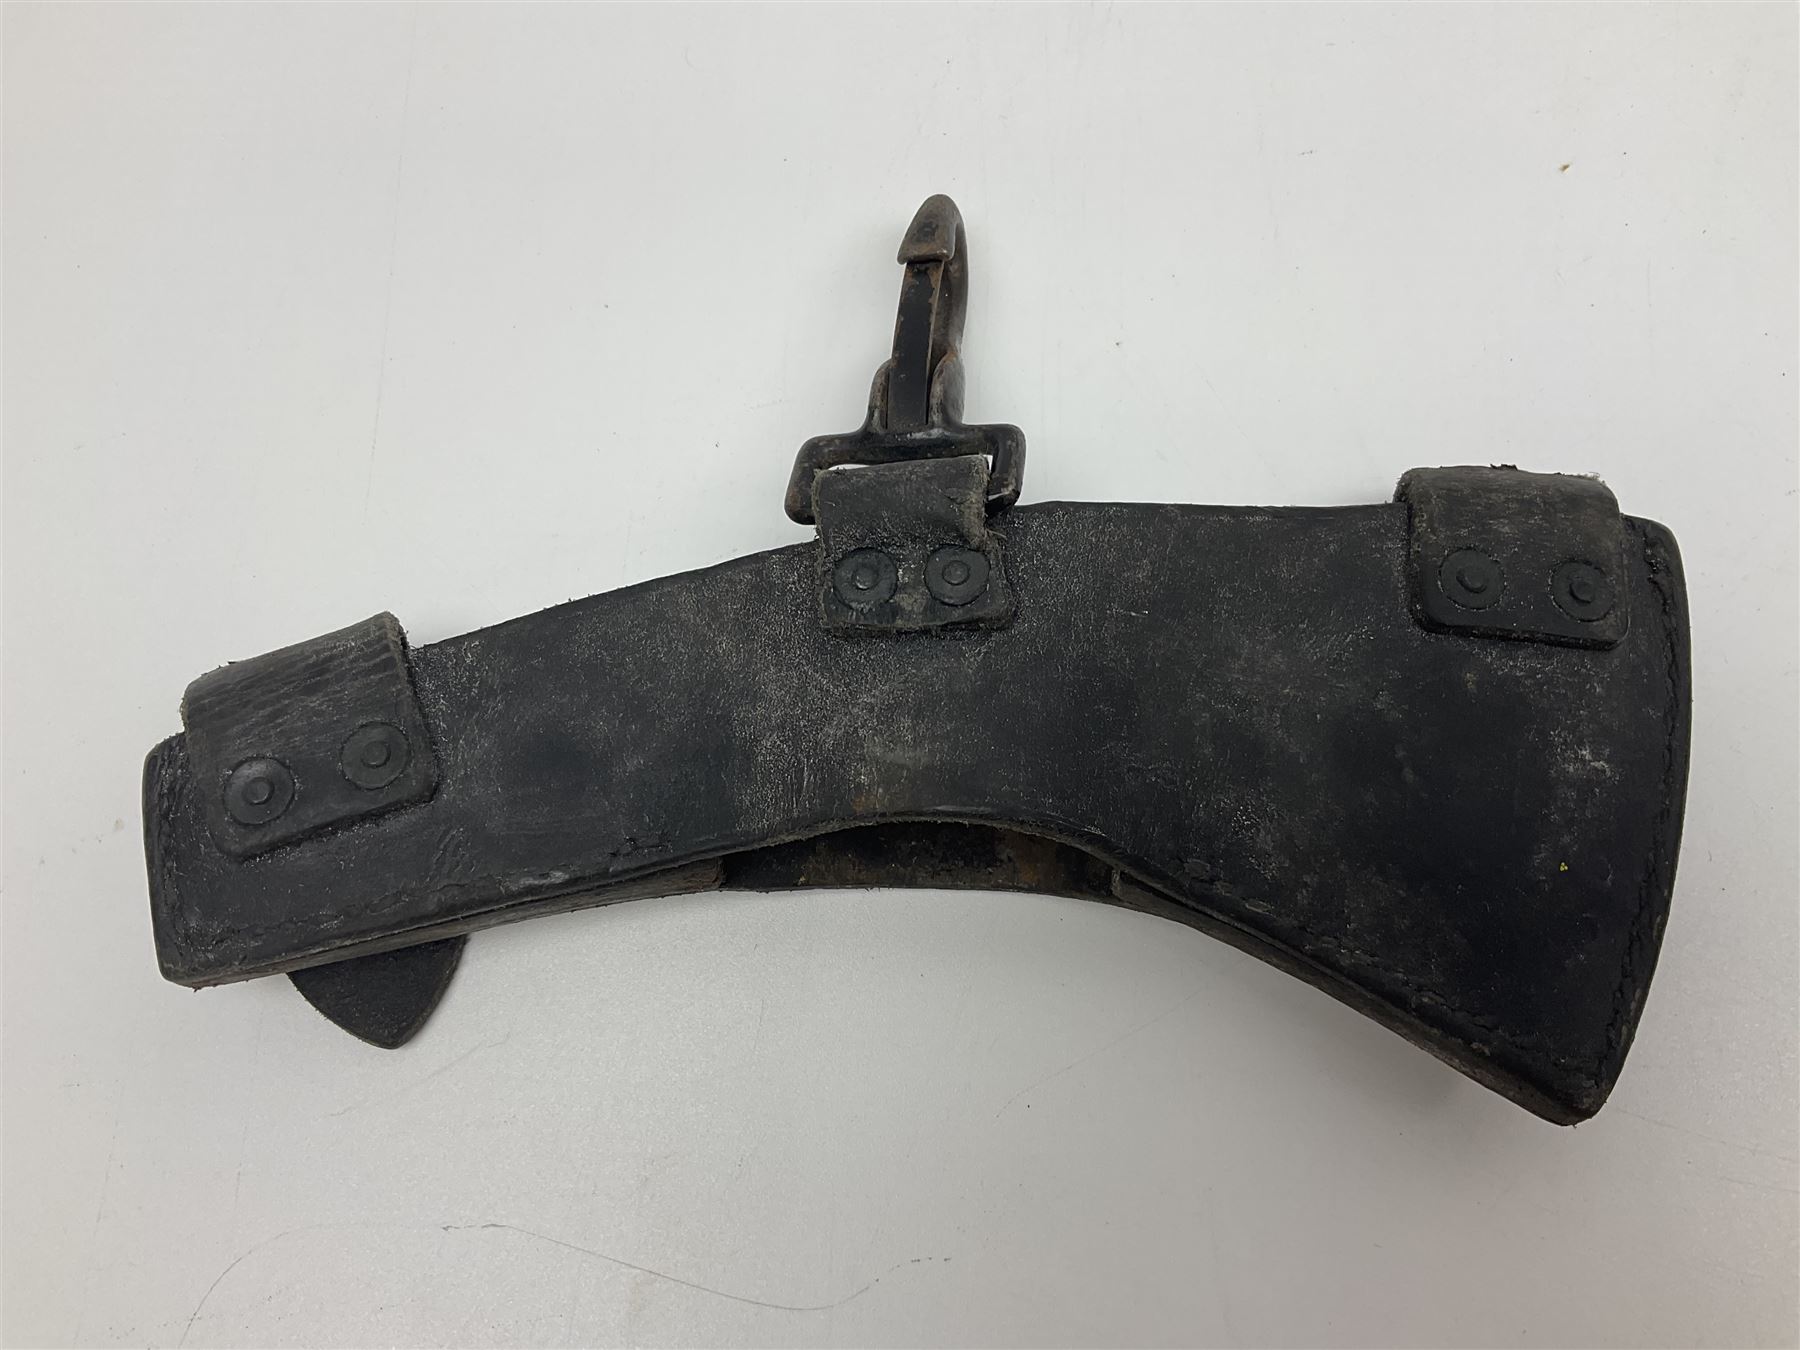 Post-War military type fireman's axe impressed 'PERKS 1953/54' with additional indistinct mark proba - Image 18 of 19